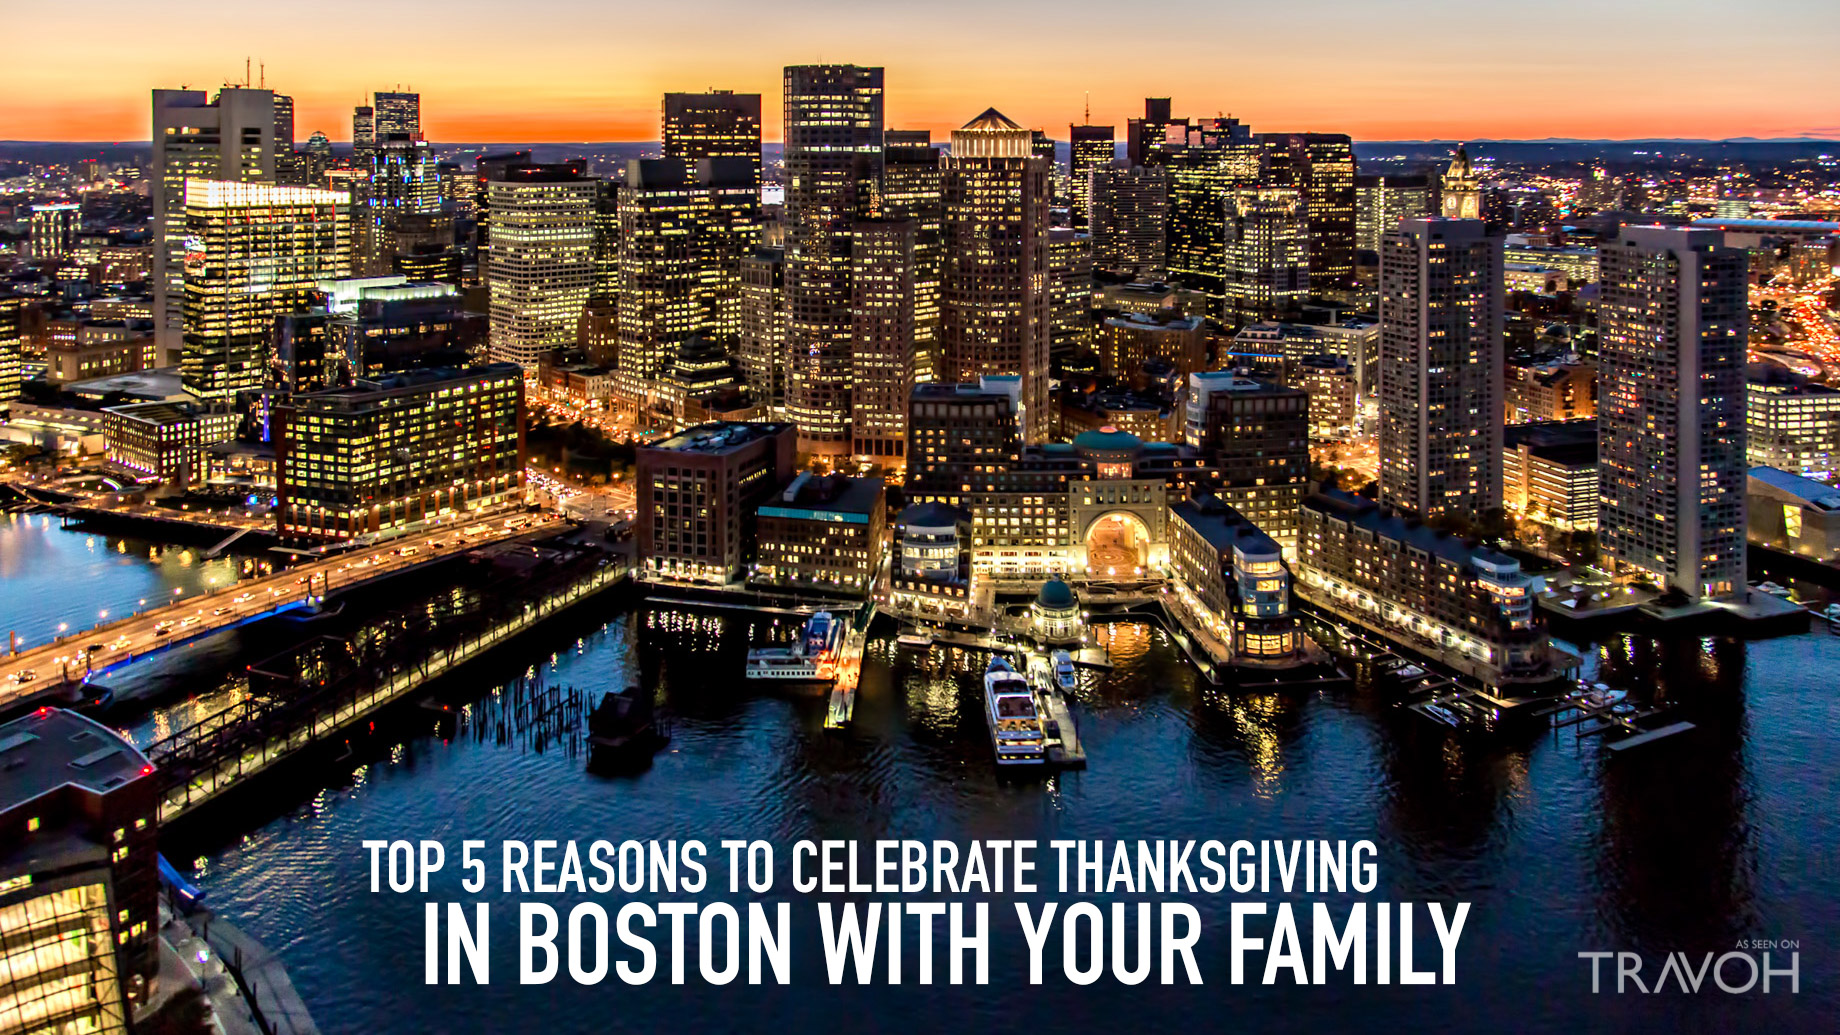 Top 5 Reasons to Celebrate Thanksgiving in Boston With Your Family